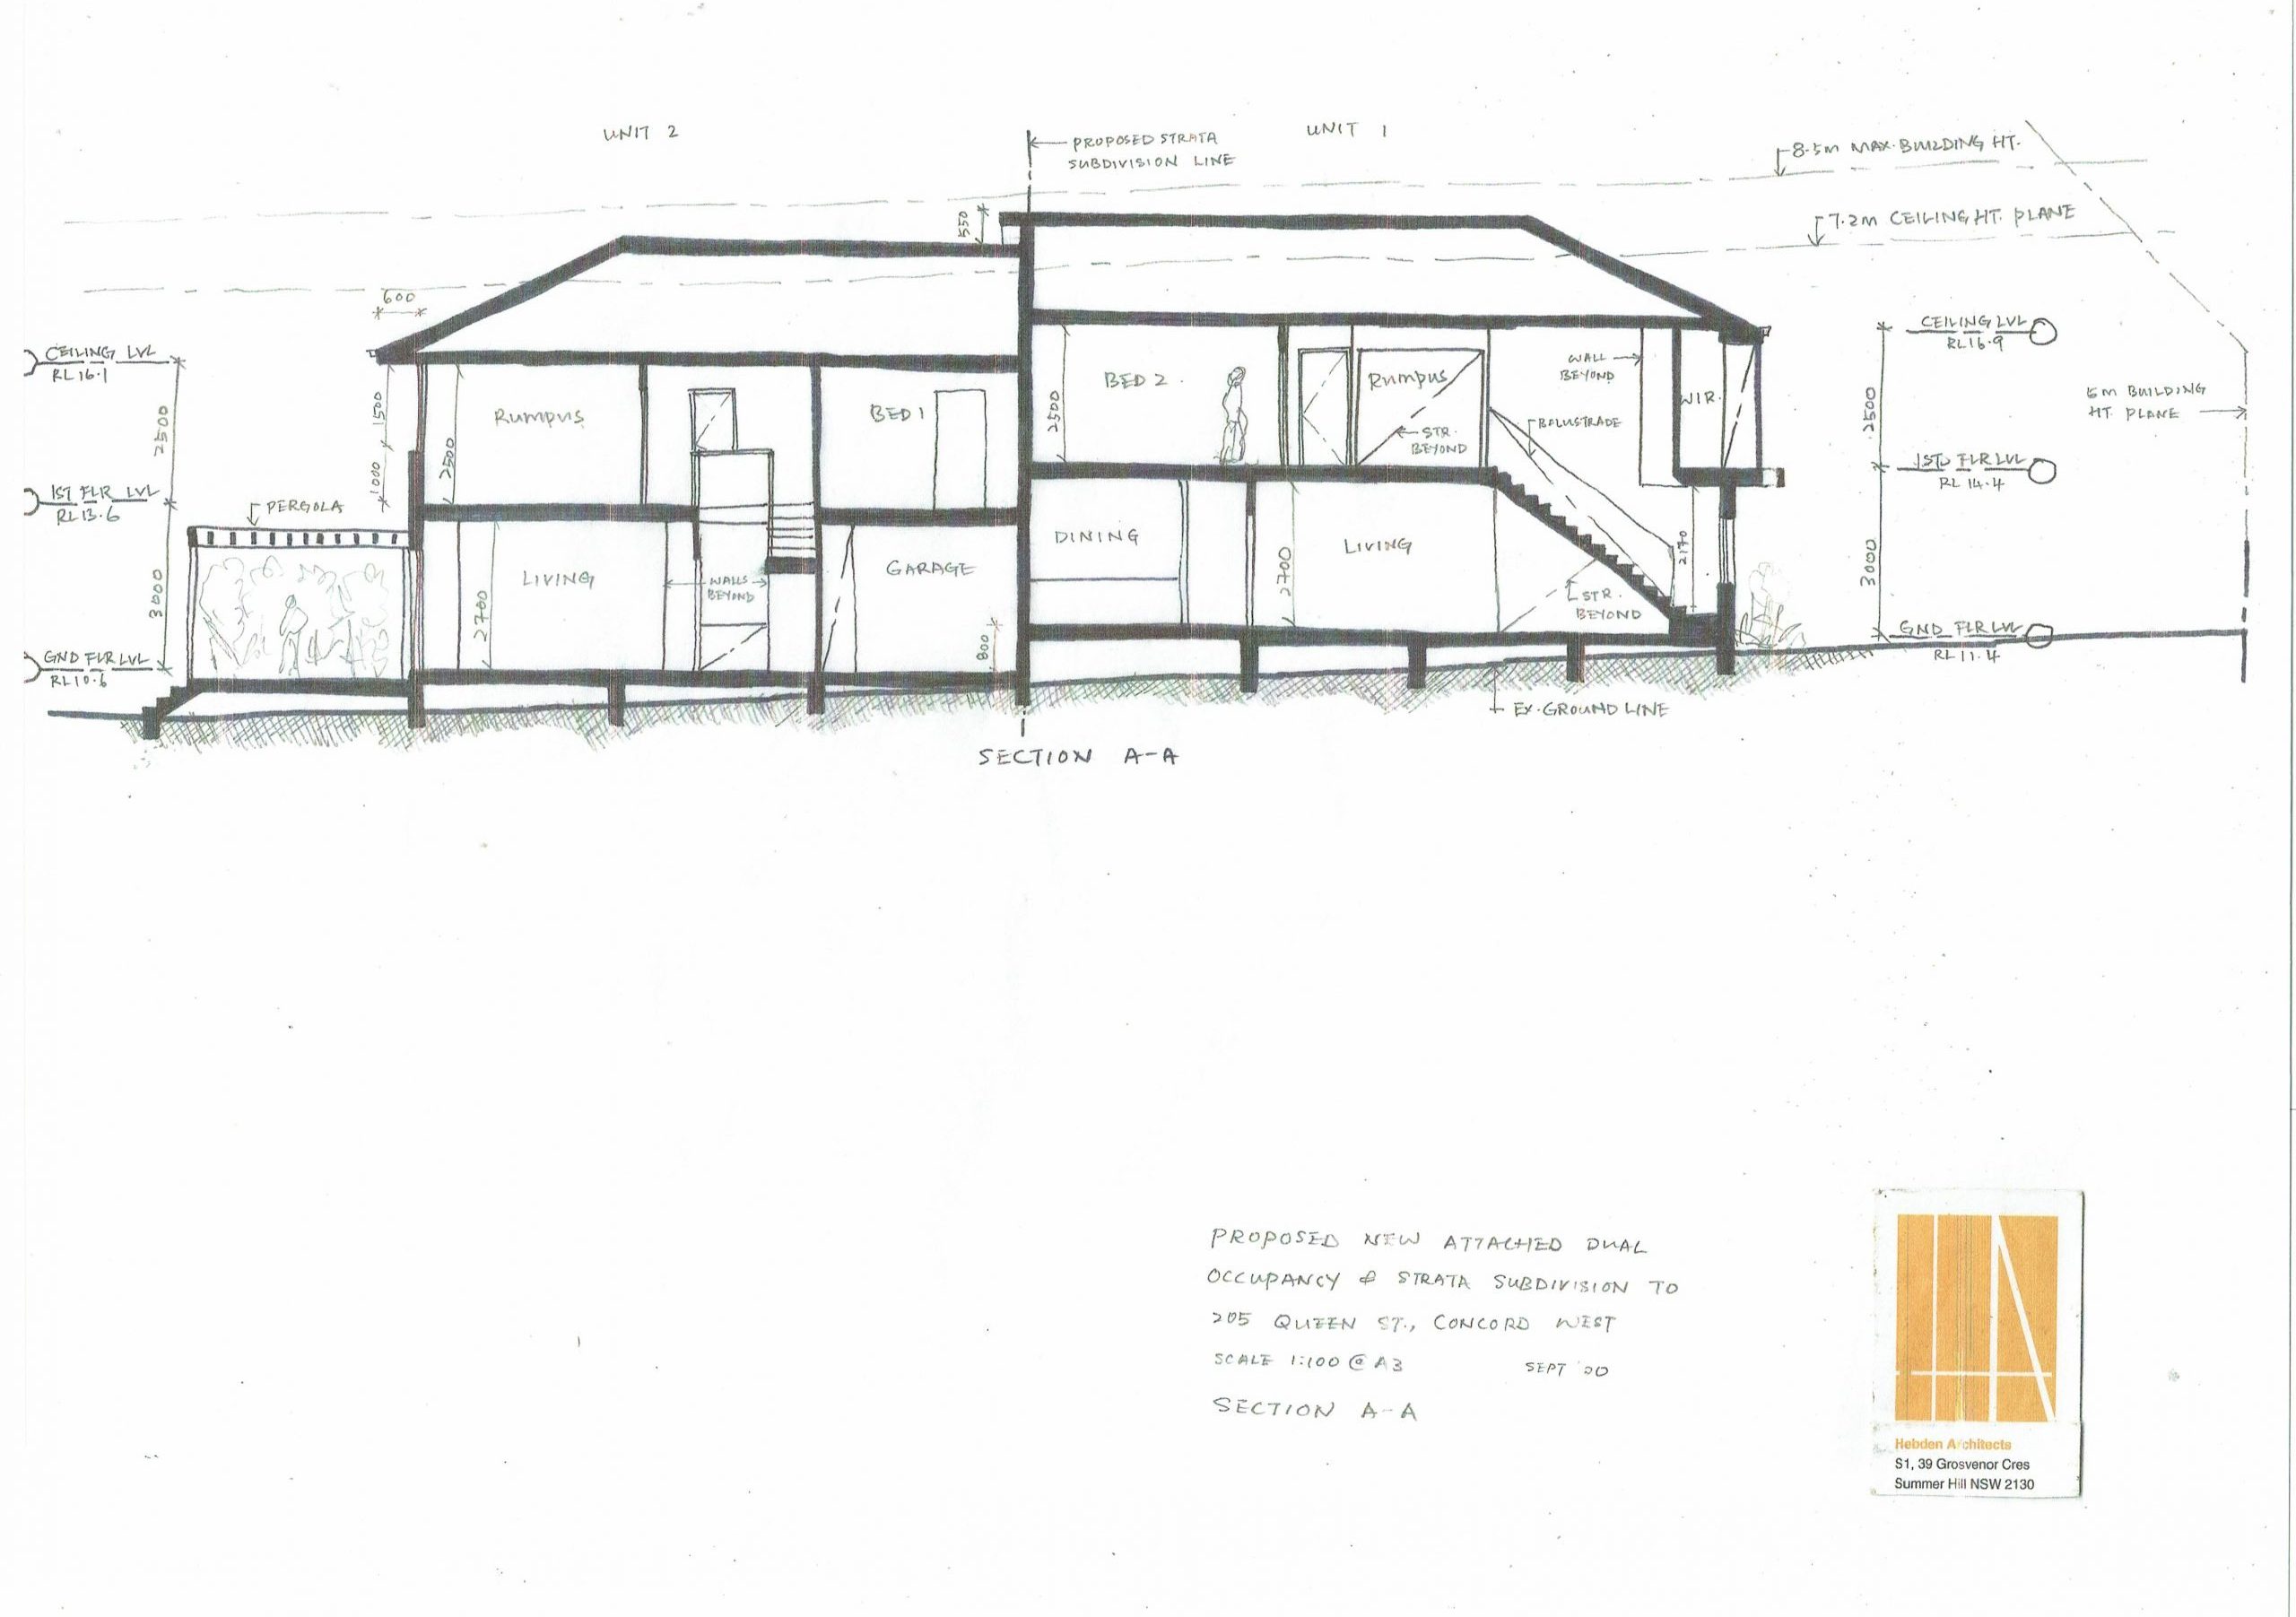 Duplex Concord West Sketch Drawings 16 09 2020 Page 5